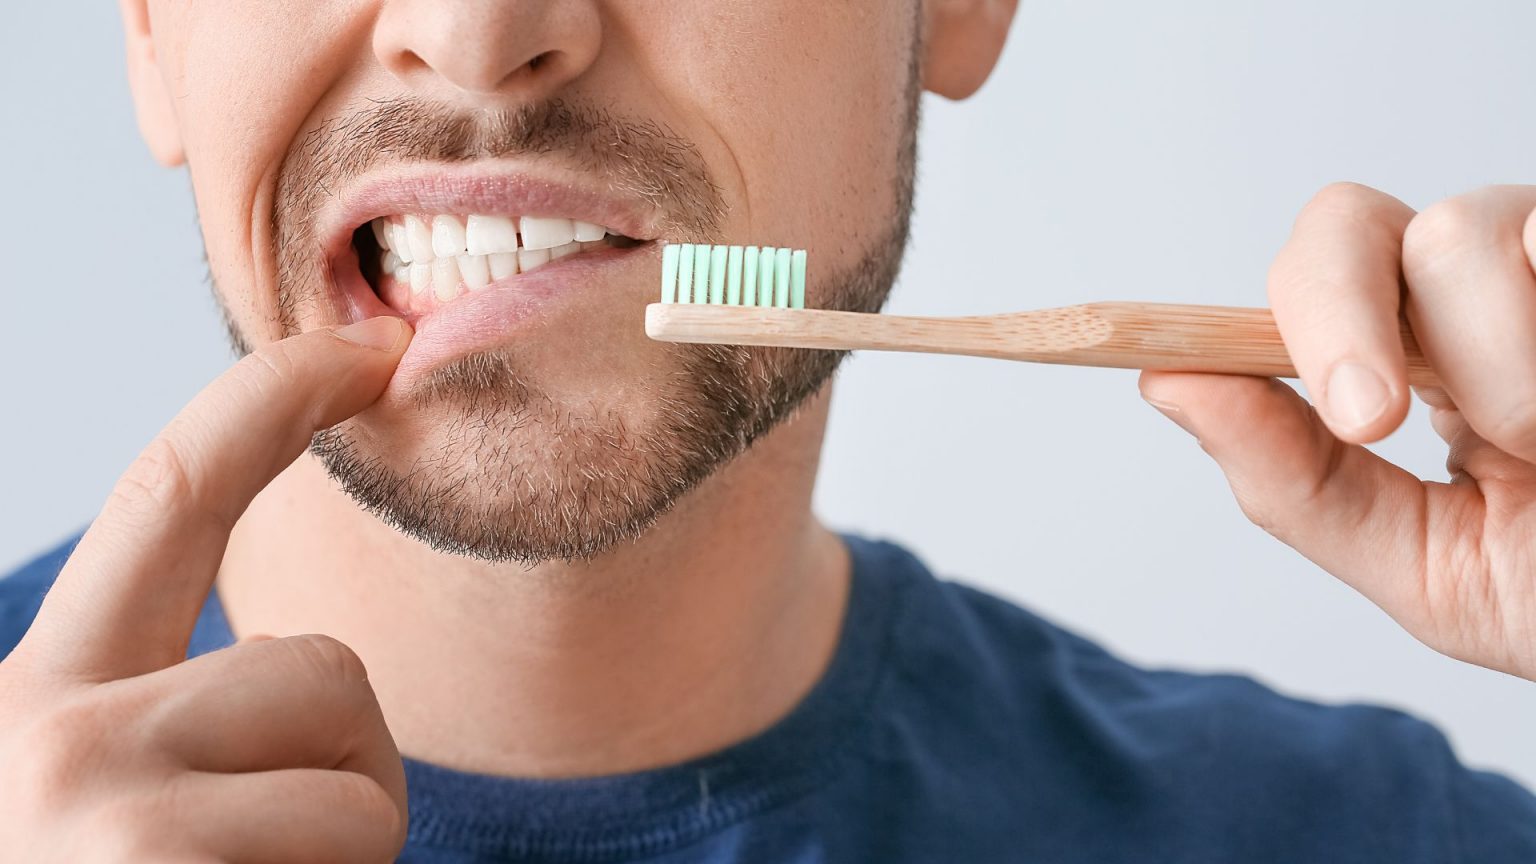 Brushing tips for wisdom teeth removal